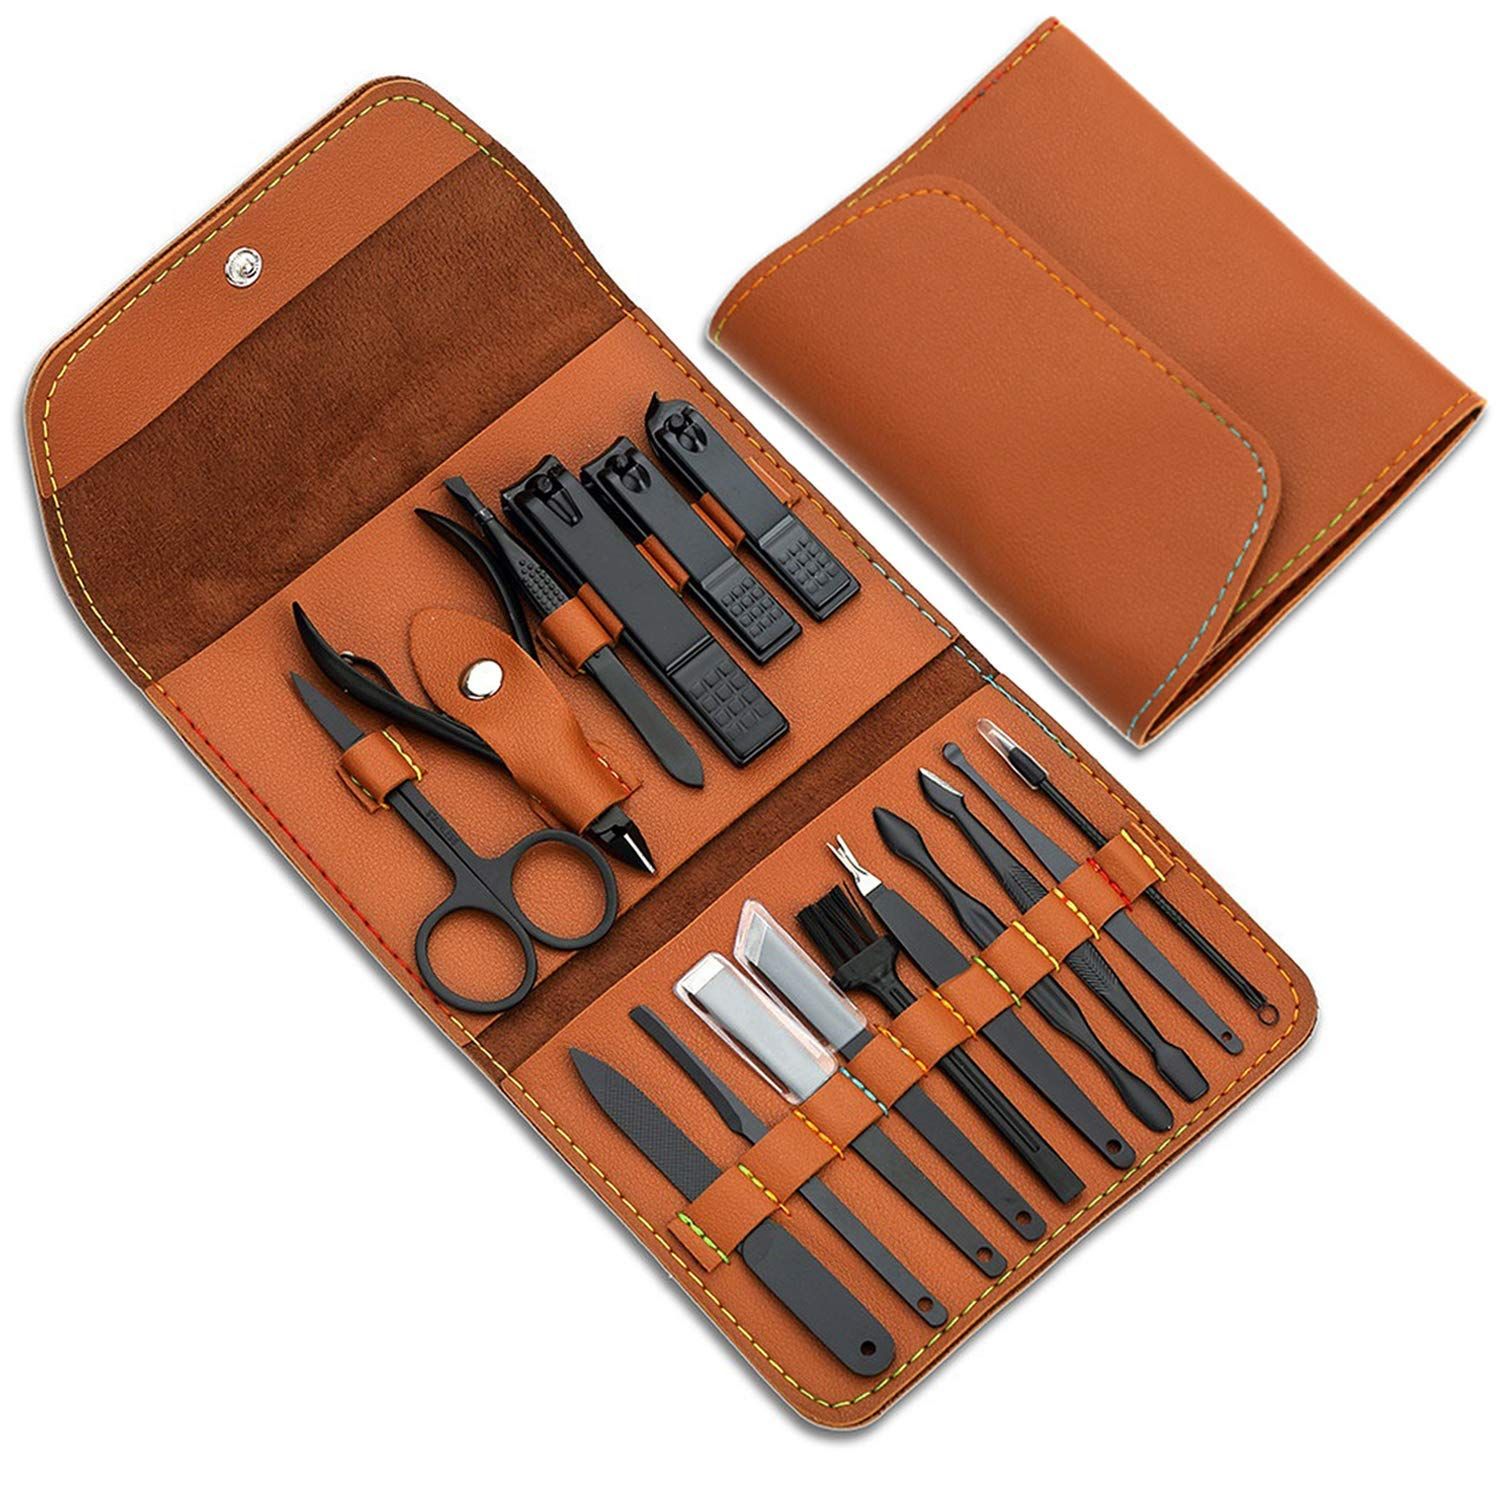 Gifts for Men/Women, Stainless Steel Manicure Set with PU leather case, Personal care tool (brown... | Amazon (US)